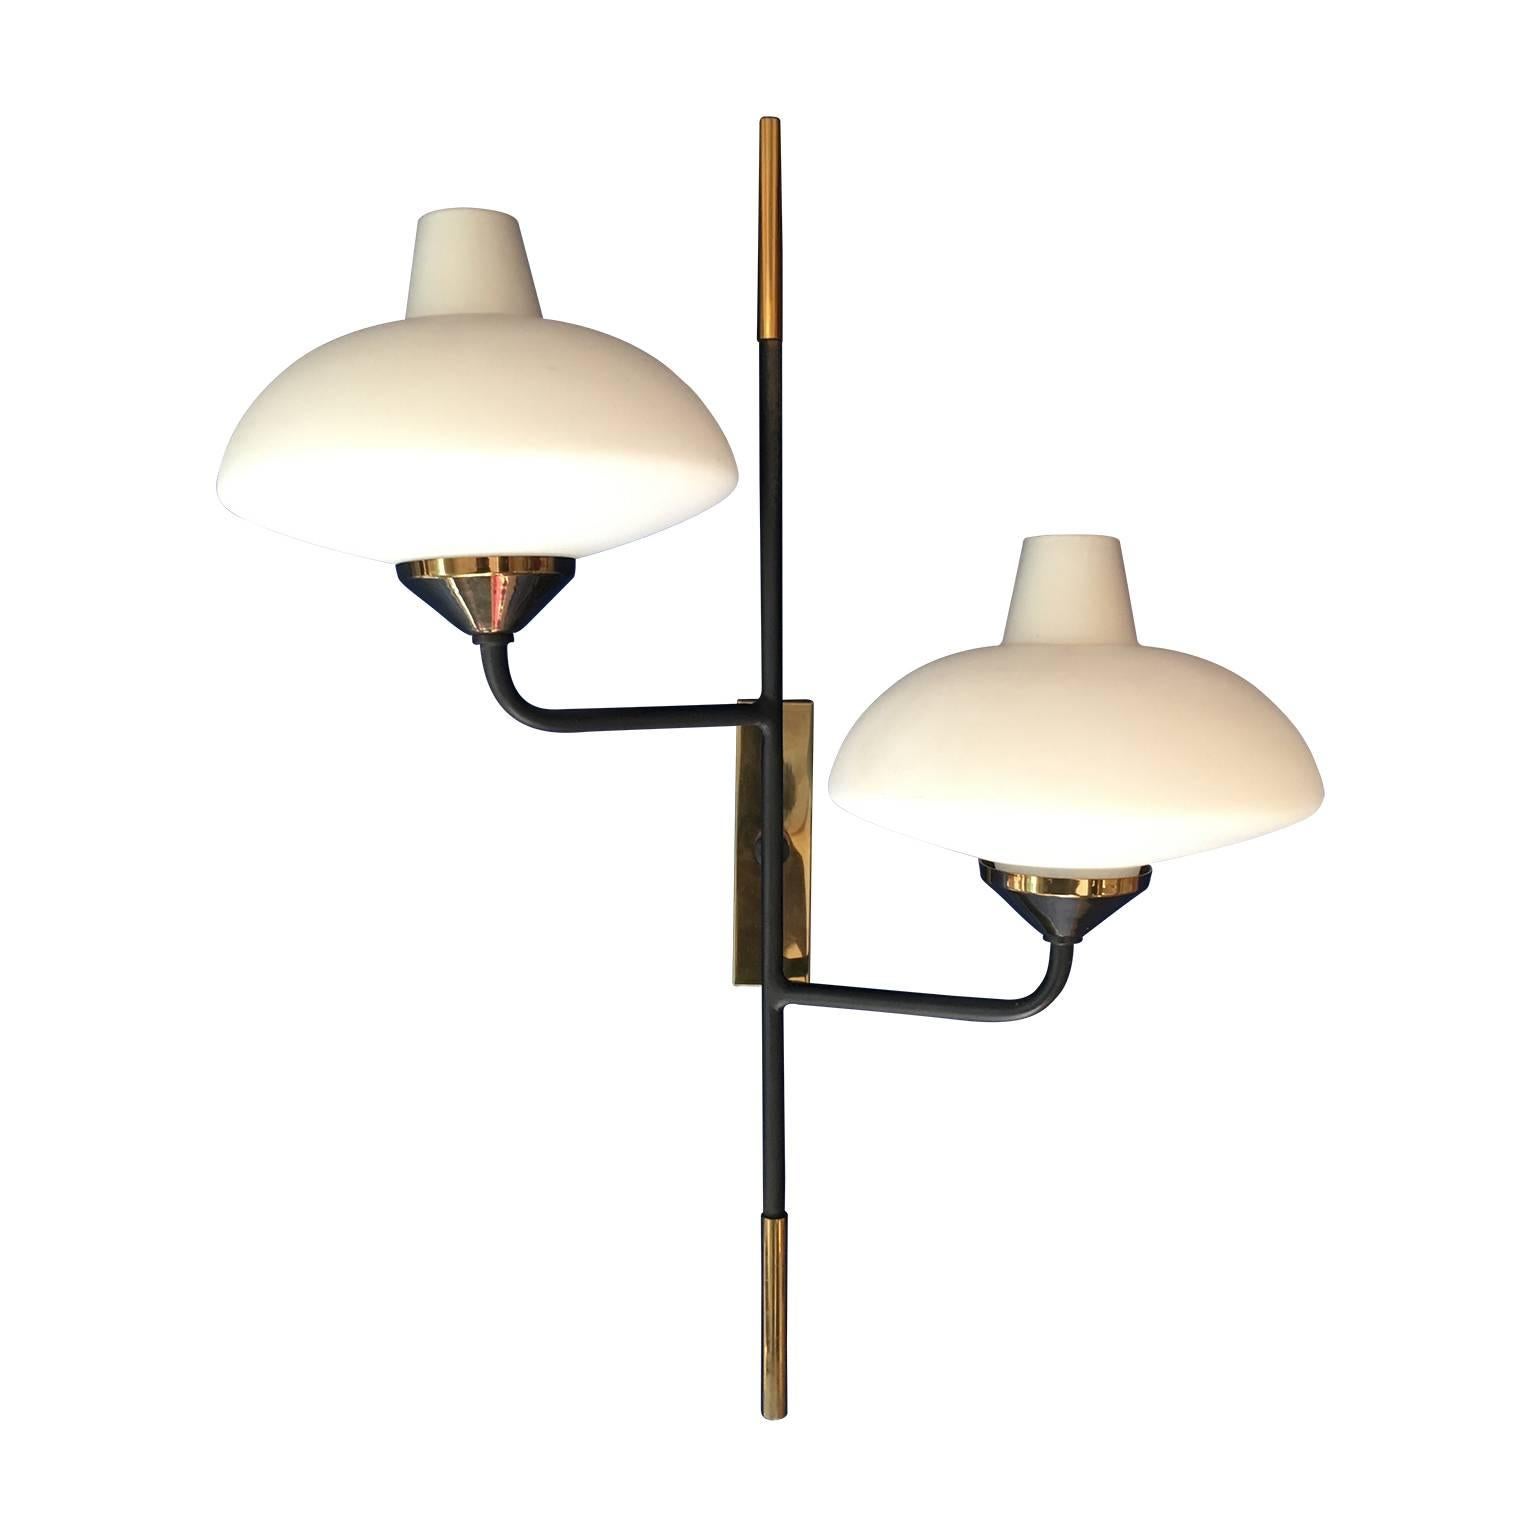 Mid-20th Century Maison Arlus 1950s Pair of Brass and Metal Sconces with Opaline Glass